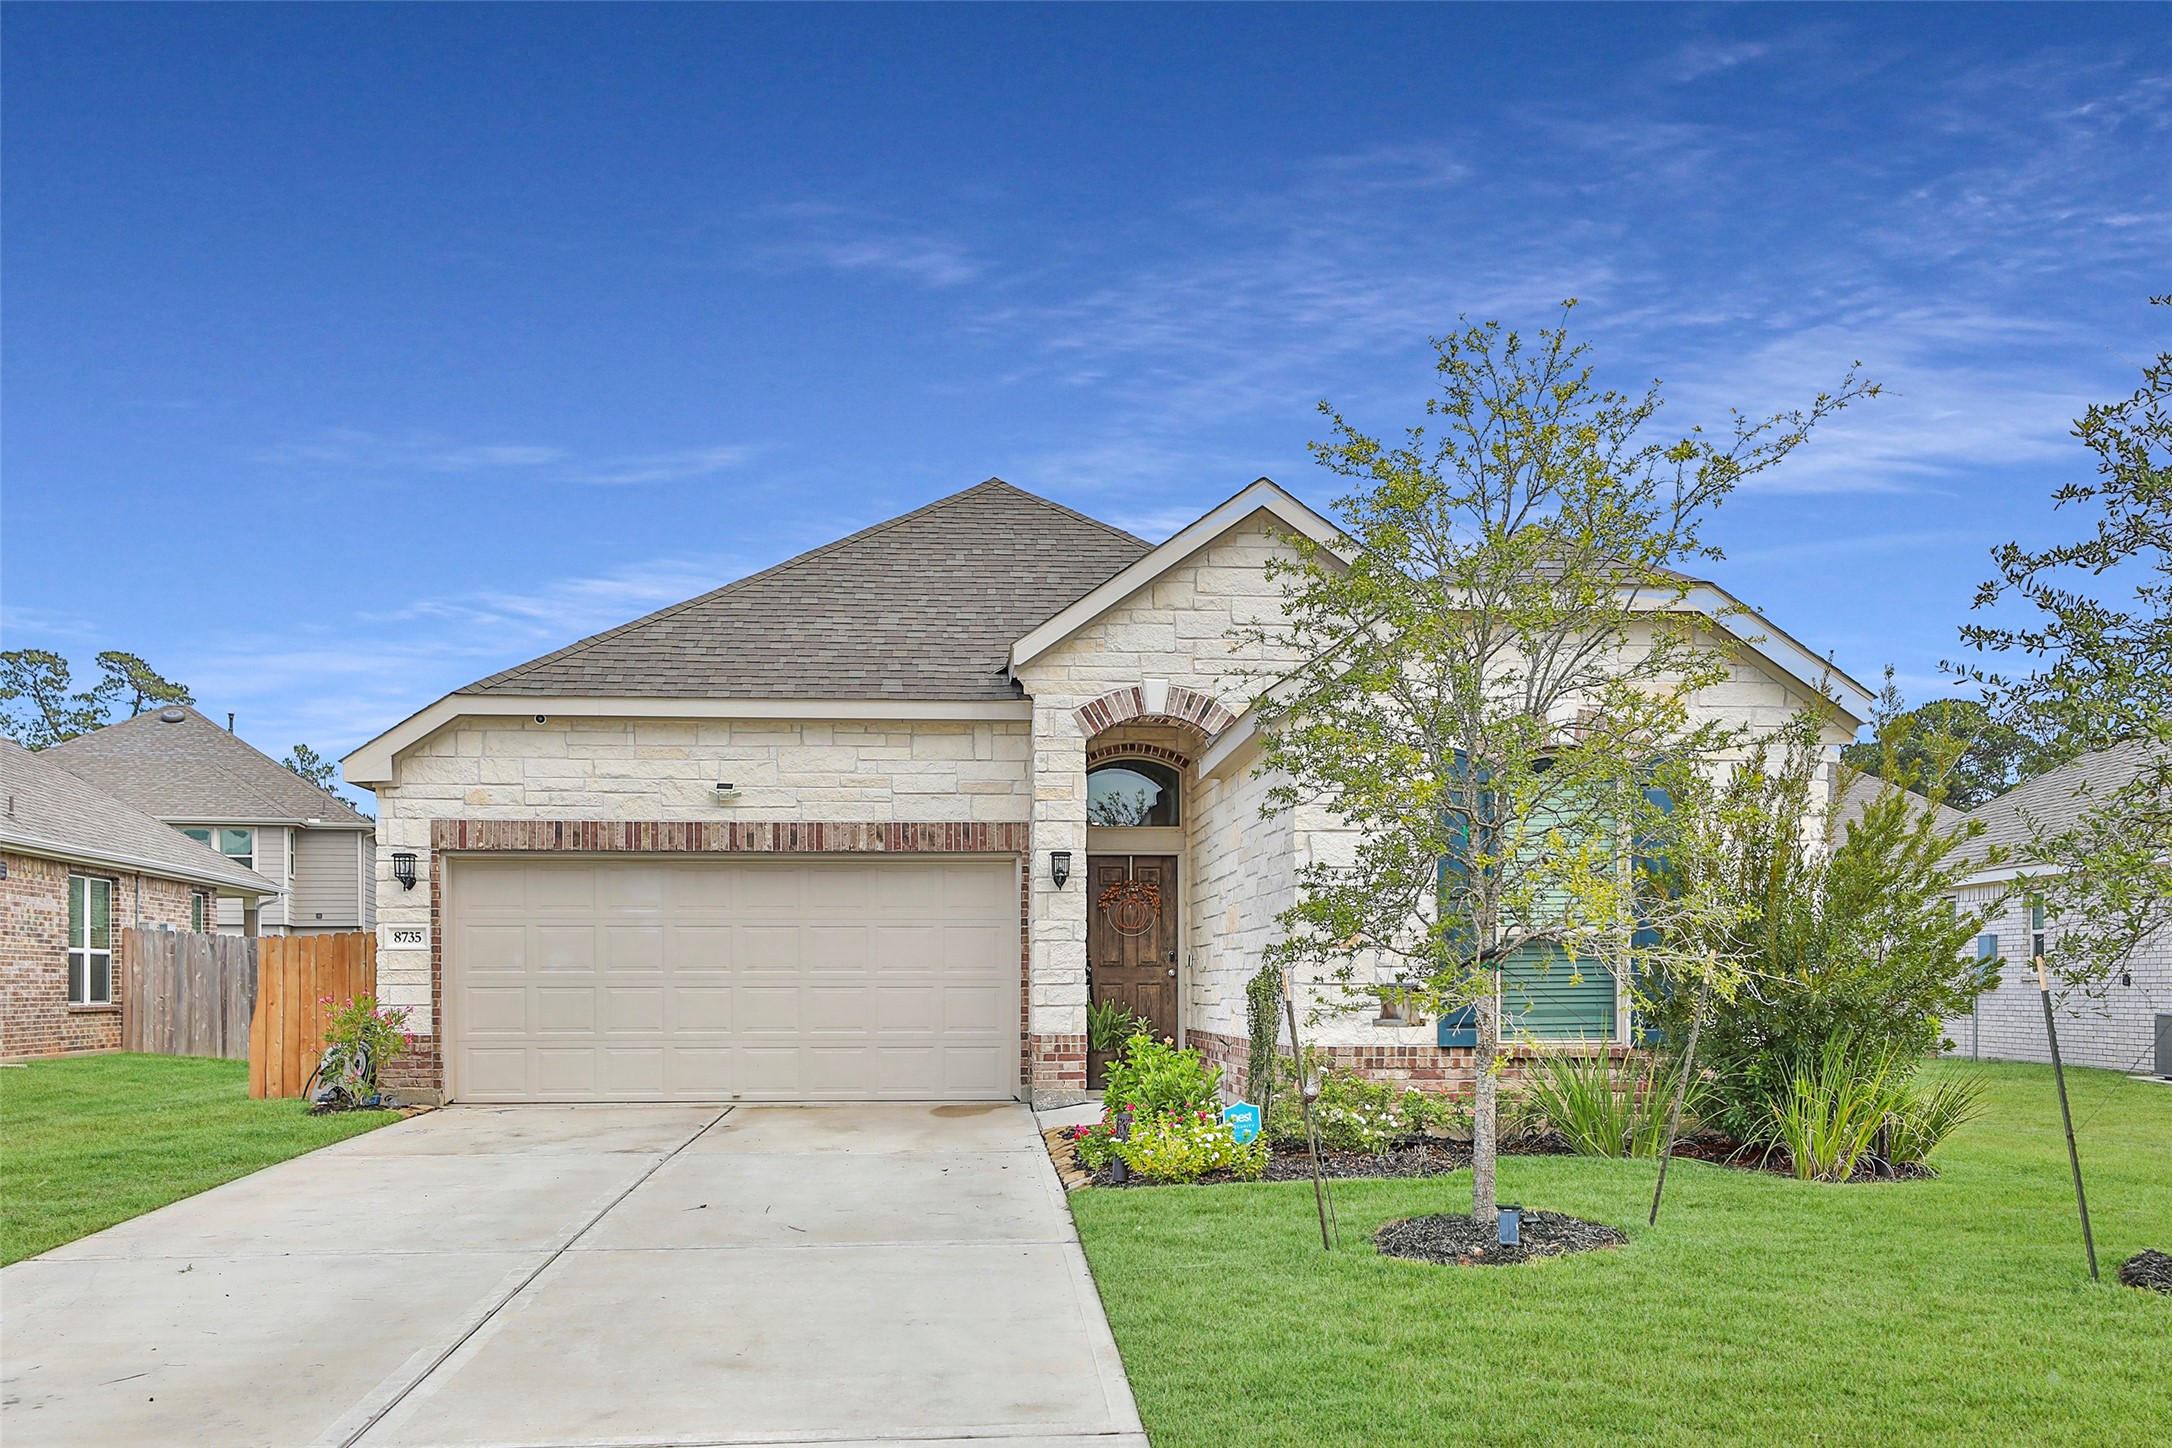 Lovely ranch home with great curb appeal